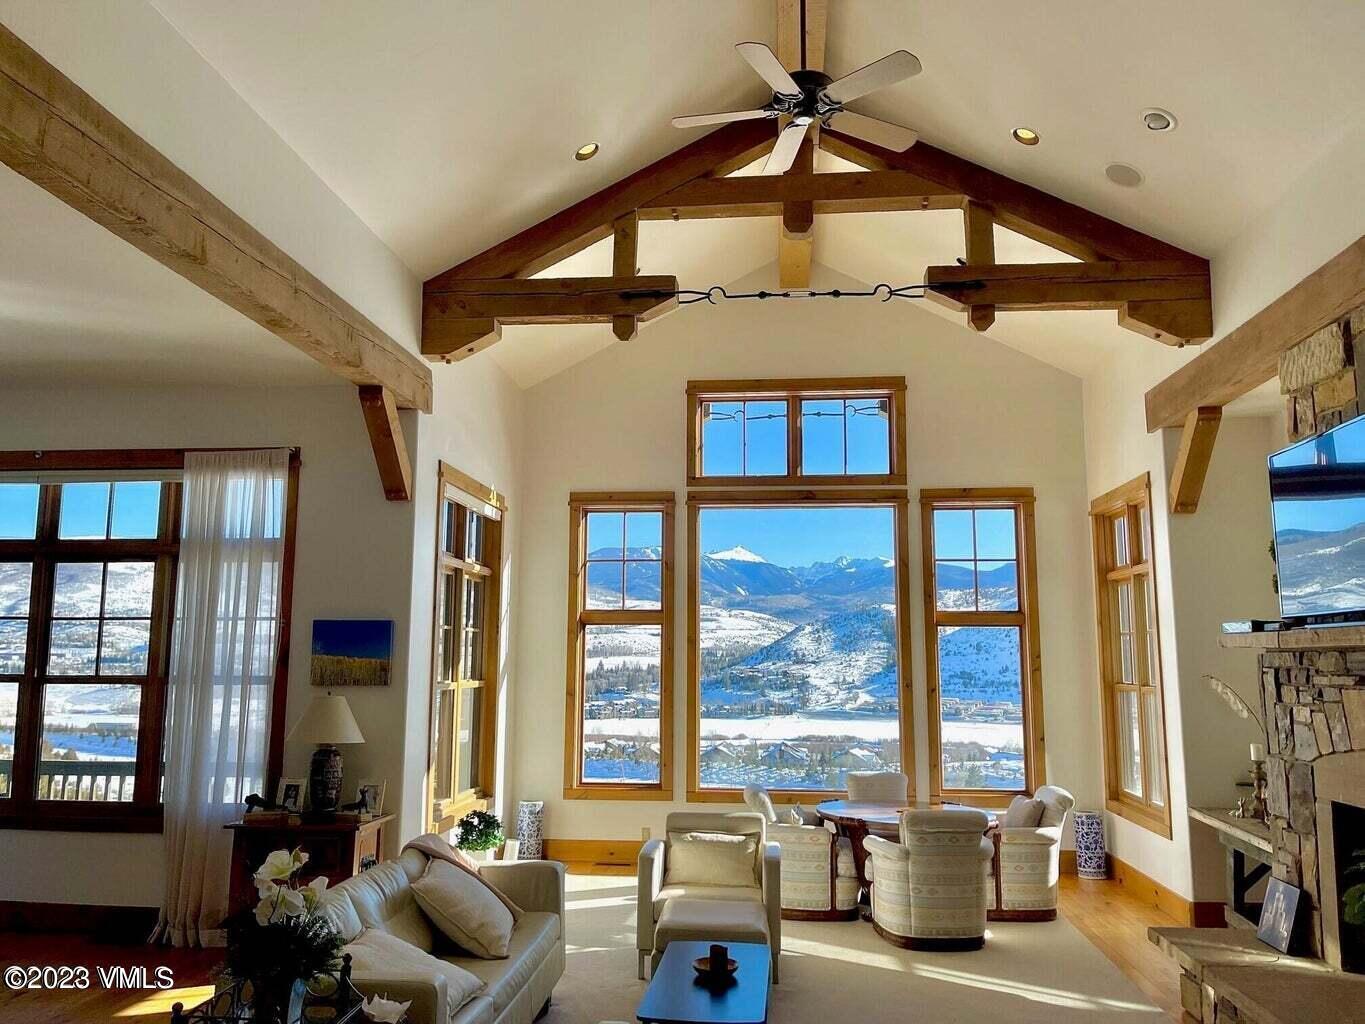 This Vail Valley, Colorado Rental is Exquisite